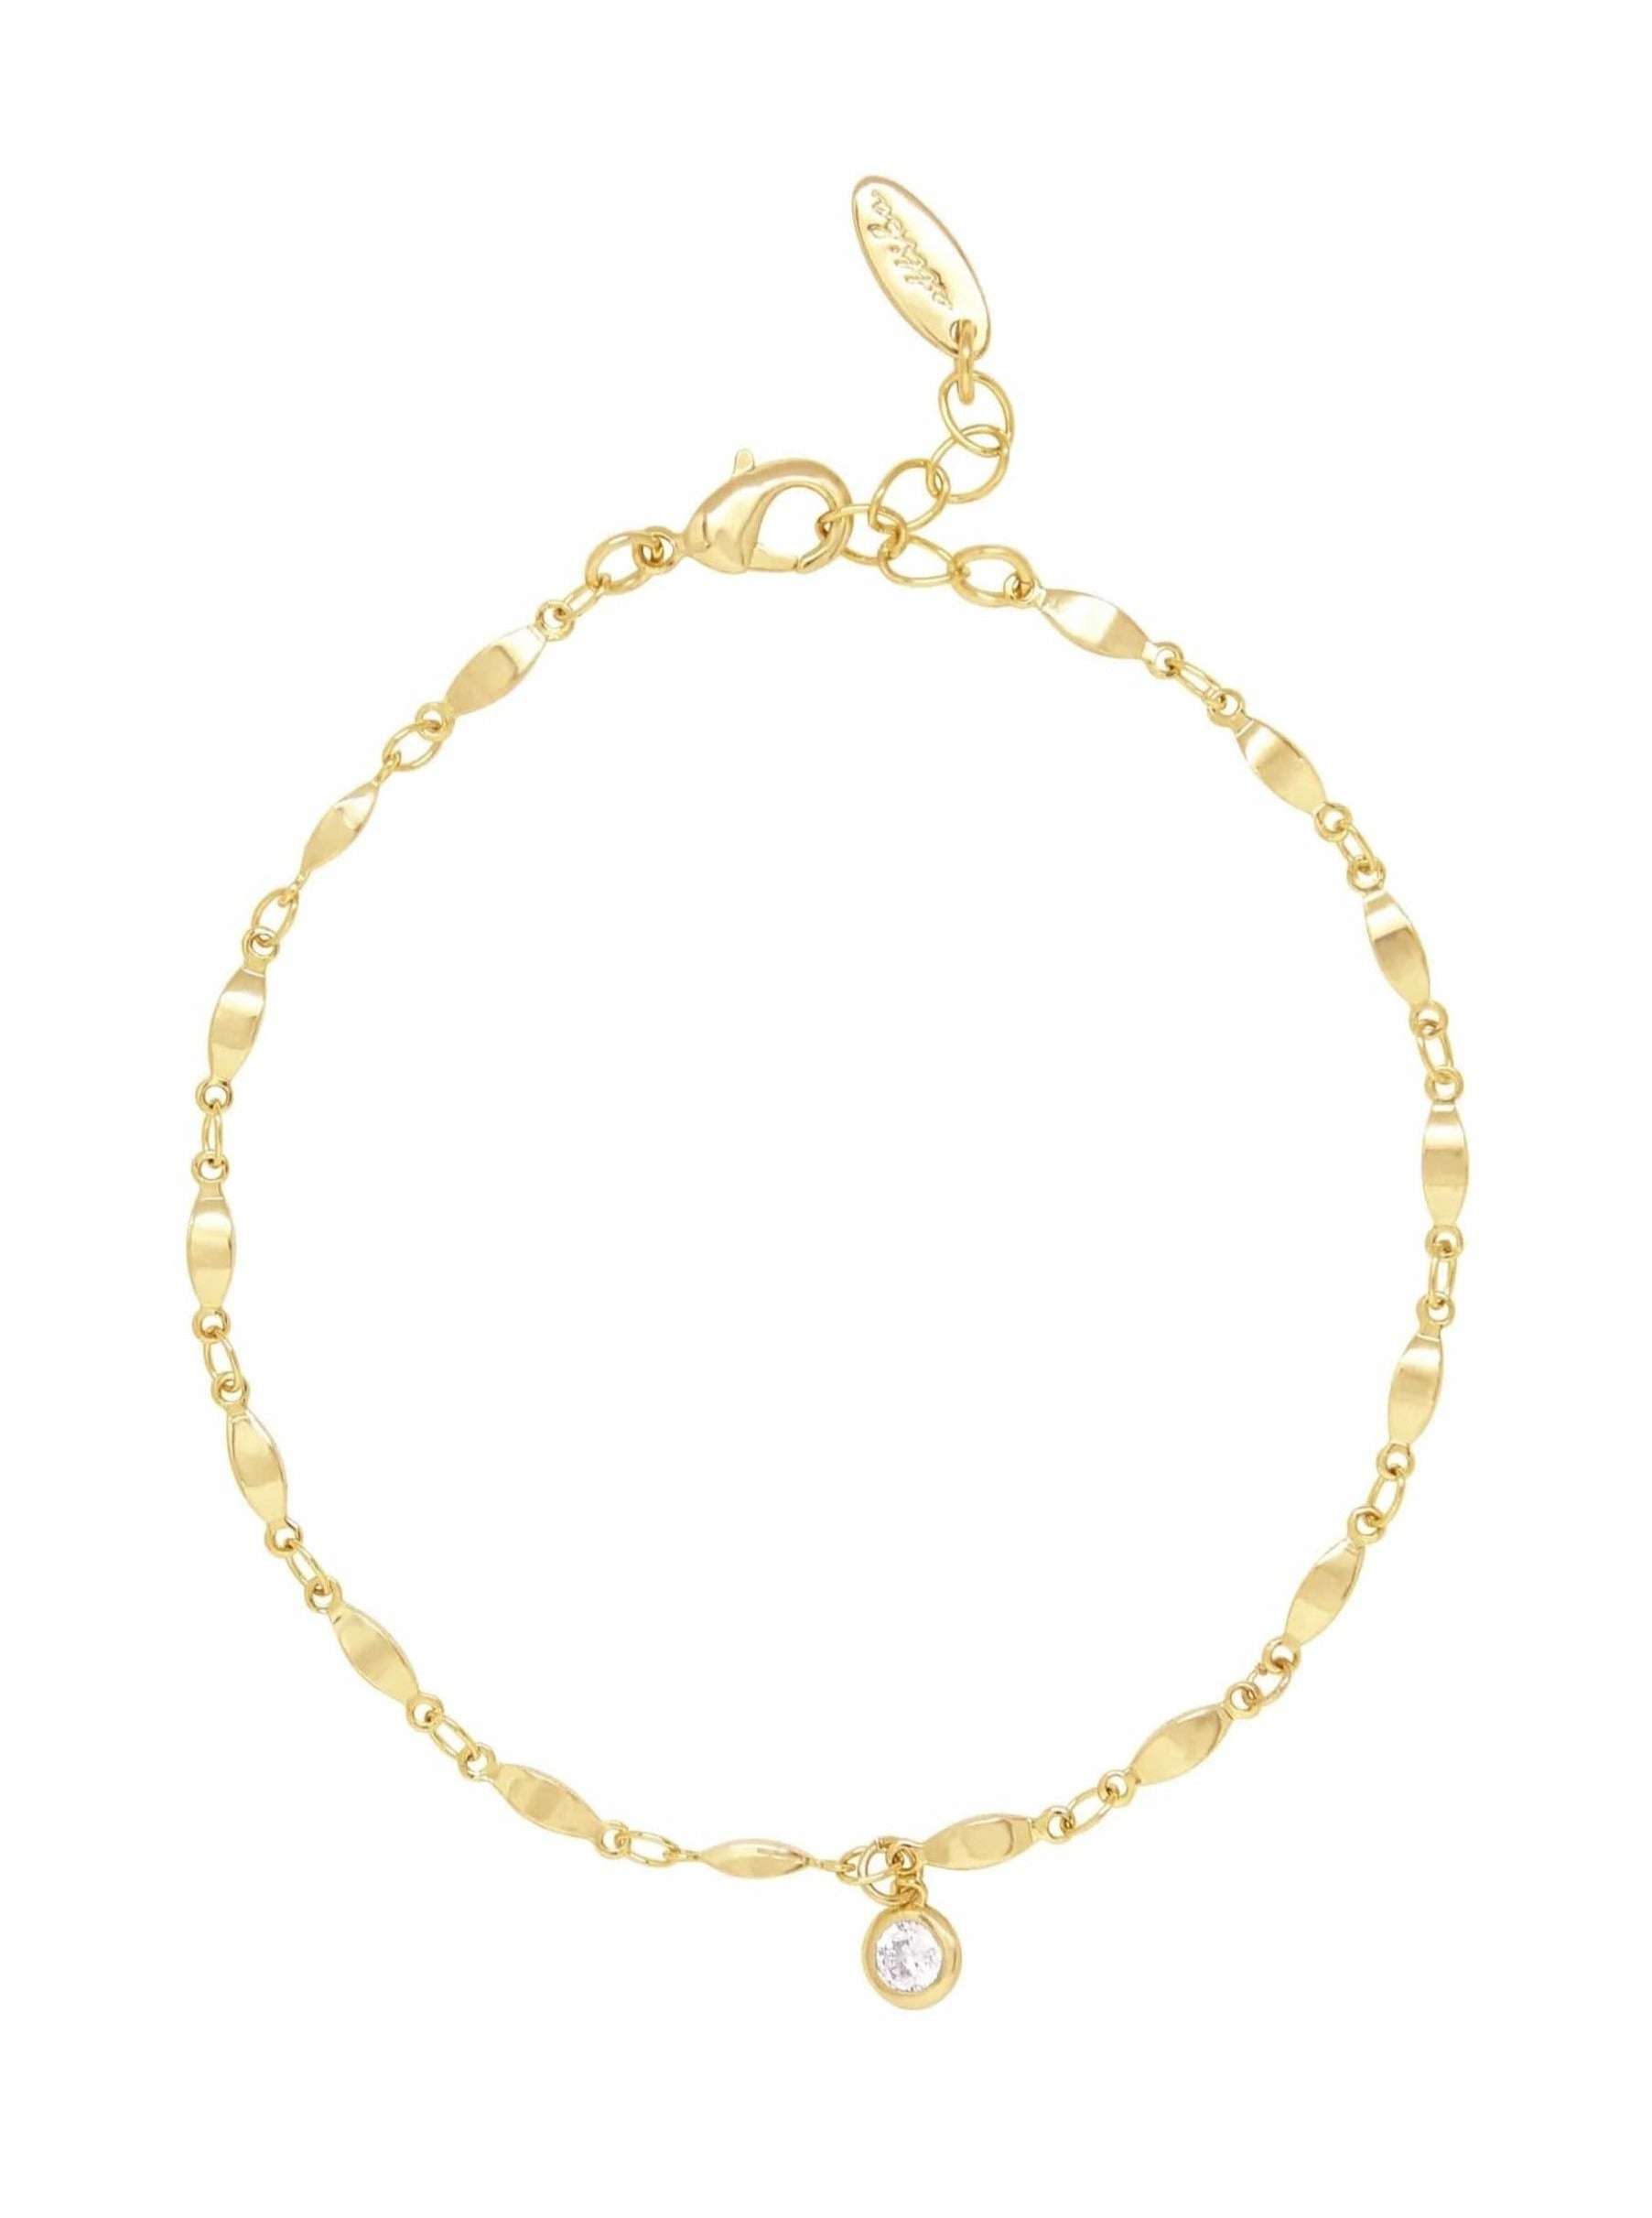 ettika anklet 18K GOLD PLATED DAY DREAMER WITH CRYSTAL CHARM // ANKLET